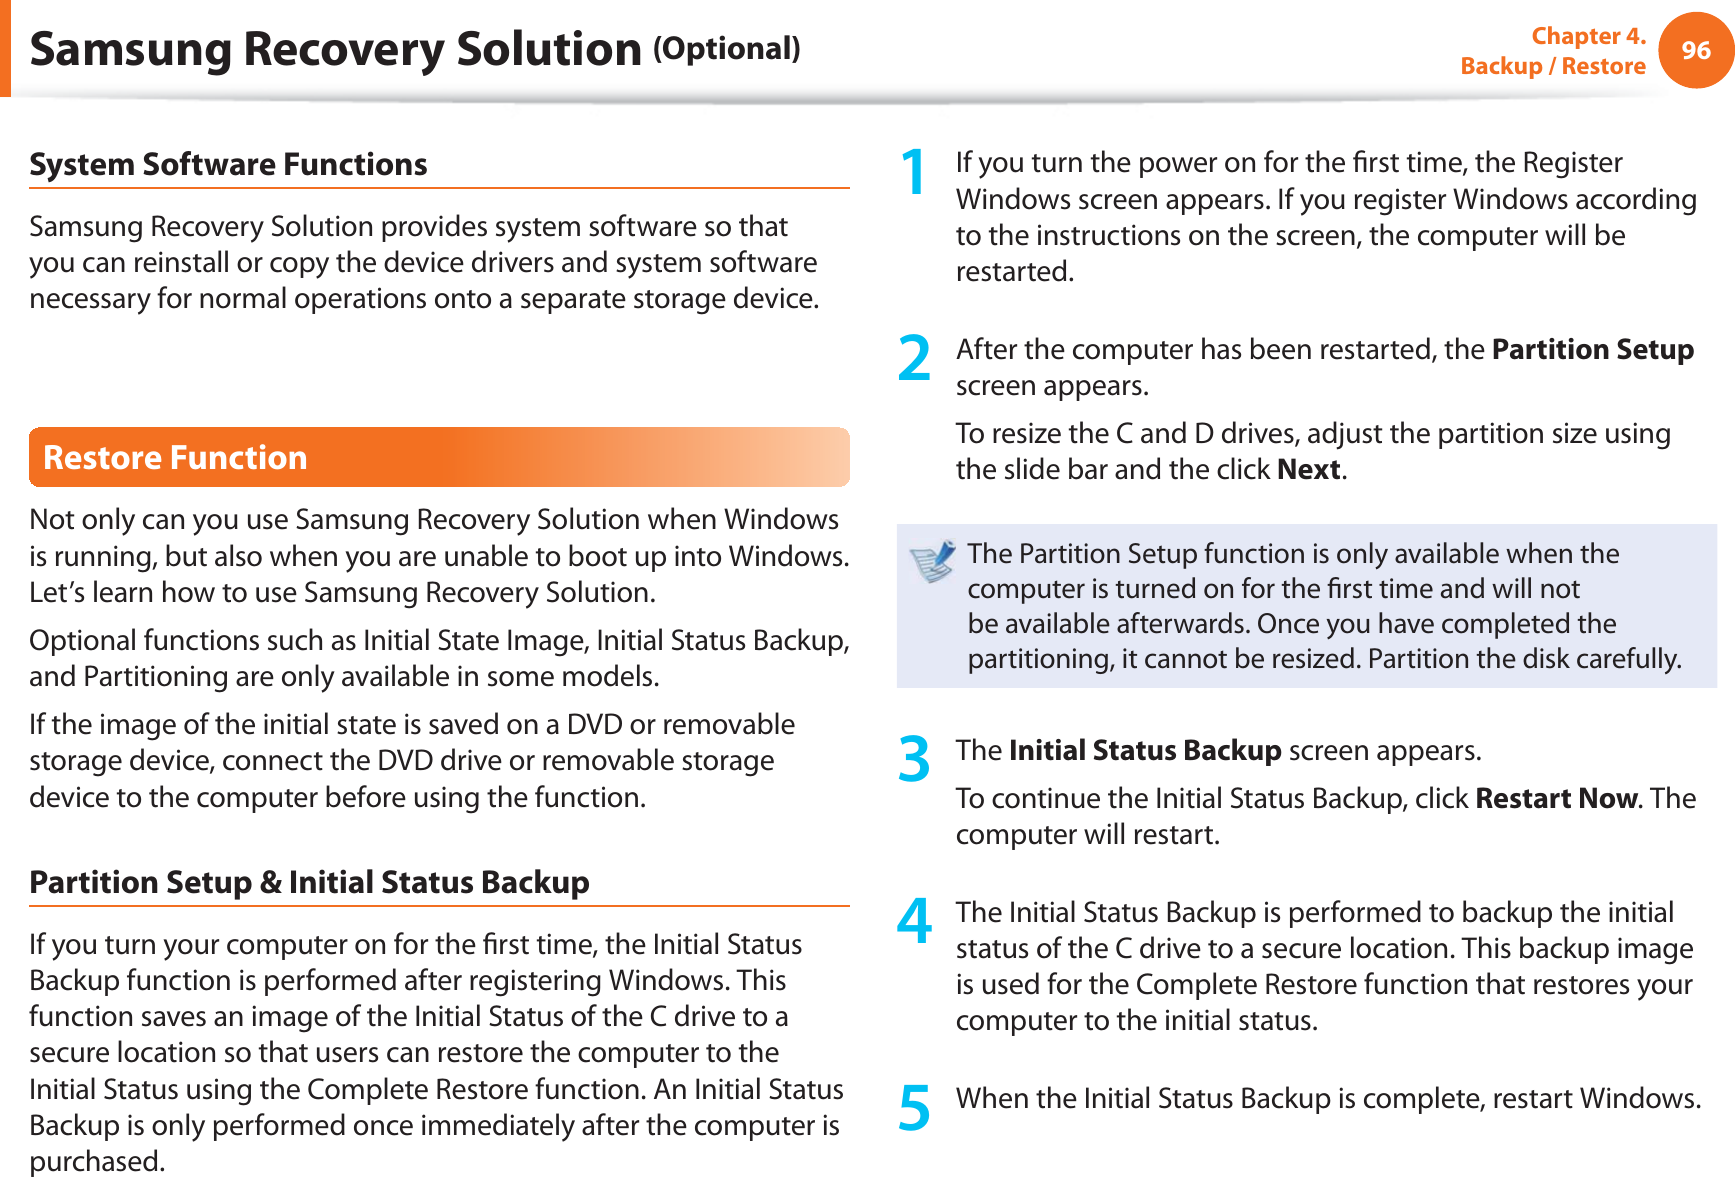 96Chapter 4.  Backup / RestoreSystem Software FunctionsSamsung Recovery Solution provides system software so that you can reinstall or copy the device drivers and system software necessary for normal operations onto a separate storage device.Restore FunctionNot only can you use Samsung Recovery Solution when Windows is running, but also when you are unable to boot up into Windows. Let’s learn how to use Samsung Recovery Solution.Optional functions such as Initial State Image, Initial Status Backup, and Partitioning are only available in some models.If the image of the initial state is saved on a DVD or removable storage device, connect the DVD drive or removable storage device to the computer before using the function.Partition Setup &amp; Initial Status BackupIf you turn your computer on for the  rst time, the Initial Status Backup function is performed after registering Windows. This function saves an image of the Initial Status of the C drive to a secure location so that users can restore the computer to the Initial Status using the Complete Restore function. An Initial Status Backup is only performed once immediately after the computer is purchased.1  If you turn the power on for the  rst time, the Register Windows screen appears. If you register Windows according to the instructions on the screen, the computer will be restarted.2  After the computer has been restarted, the Partition Setup screen appears. To resize the C and D drives, adjust the partition size using the slide bar and the click Next.The Partition Setup function is only available when the computer is turned on for the  rst time and will not be available afterwards. Once you have completed the partitioning, it cannot be resized. Partition the disk carefully.3 The Initial Status Backup screen appears. To continue the Initial Status Backup, click Restart Now. The computer will restart.4  The Initial Status Backup is performed to backup the initial status of the C drive to a secure location. This backup image is used for the Complete Restore function that restores your computer to the initial status.5  When the Initial Status Backup is complete, restart Windows.Samsung Recovery Solution (Optional)